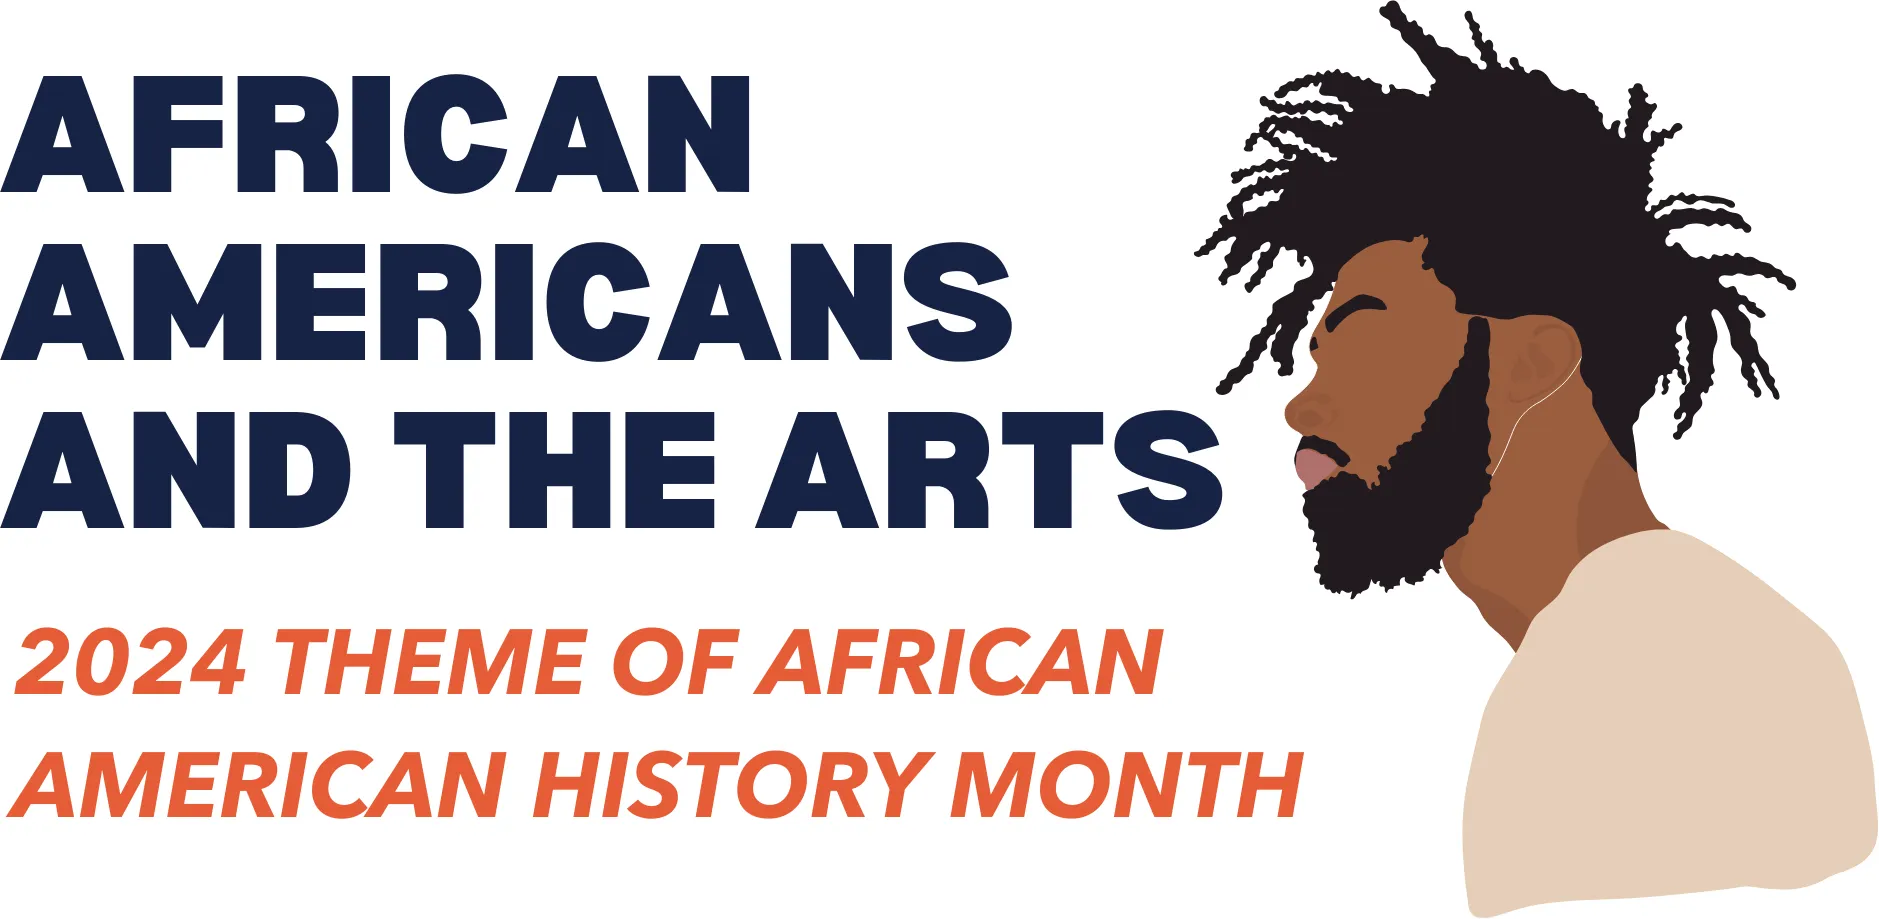 African Americans and the Arts: 2024 Theme of African American History Month